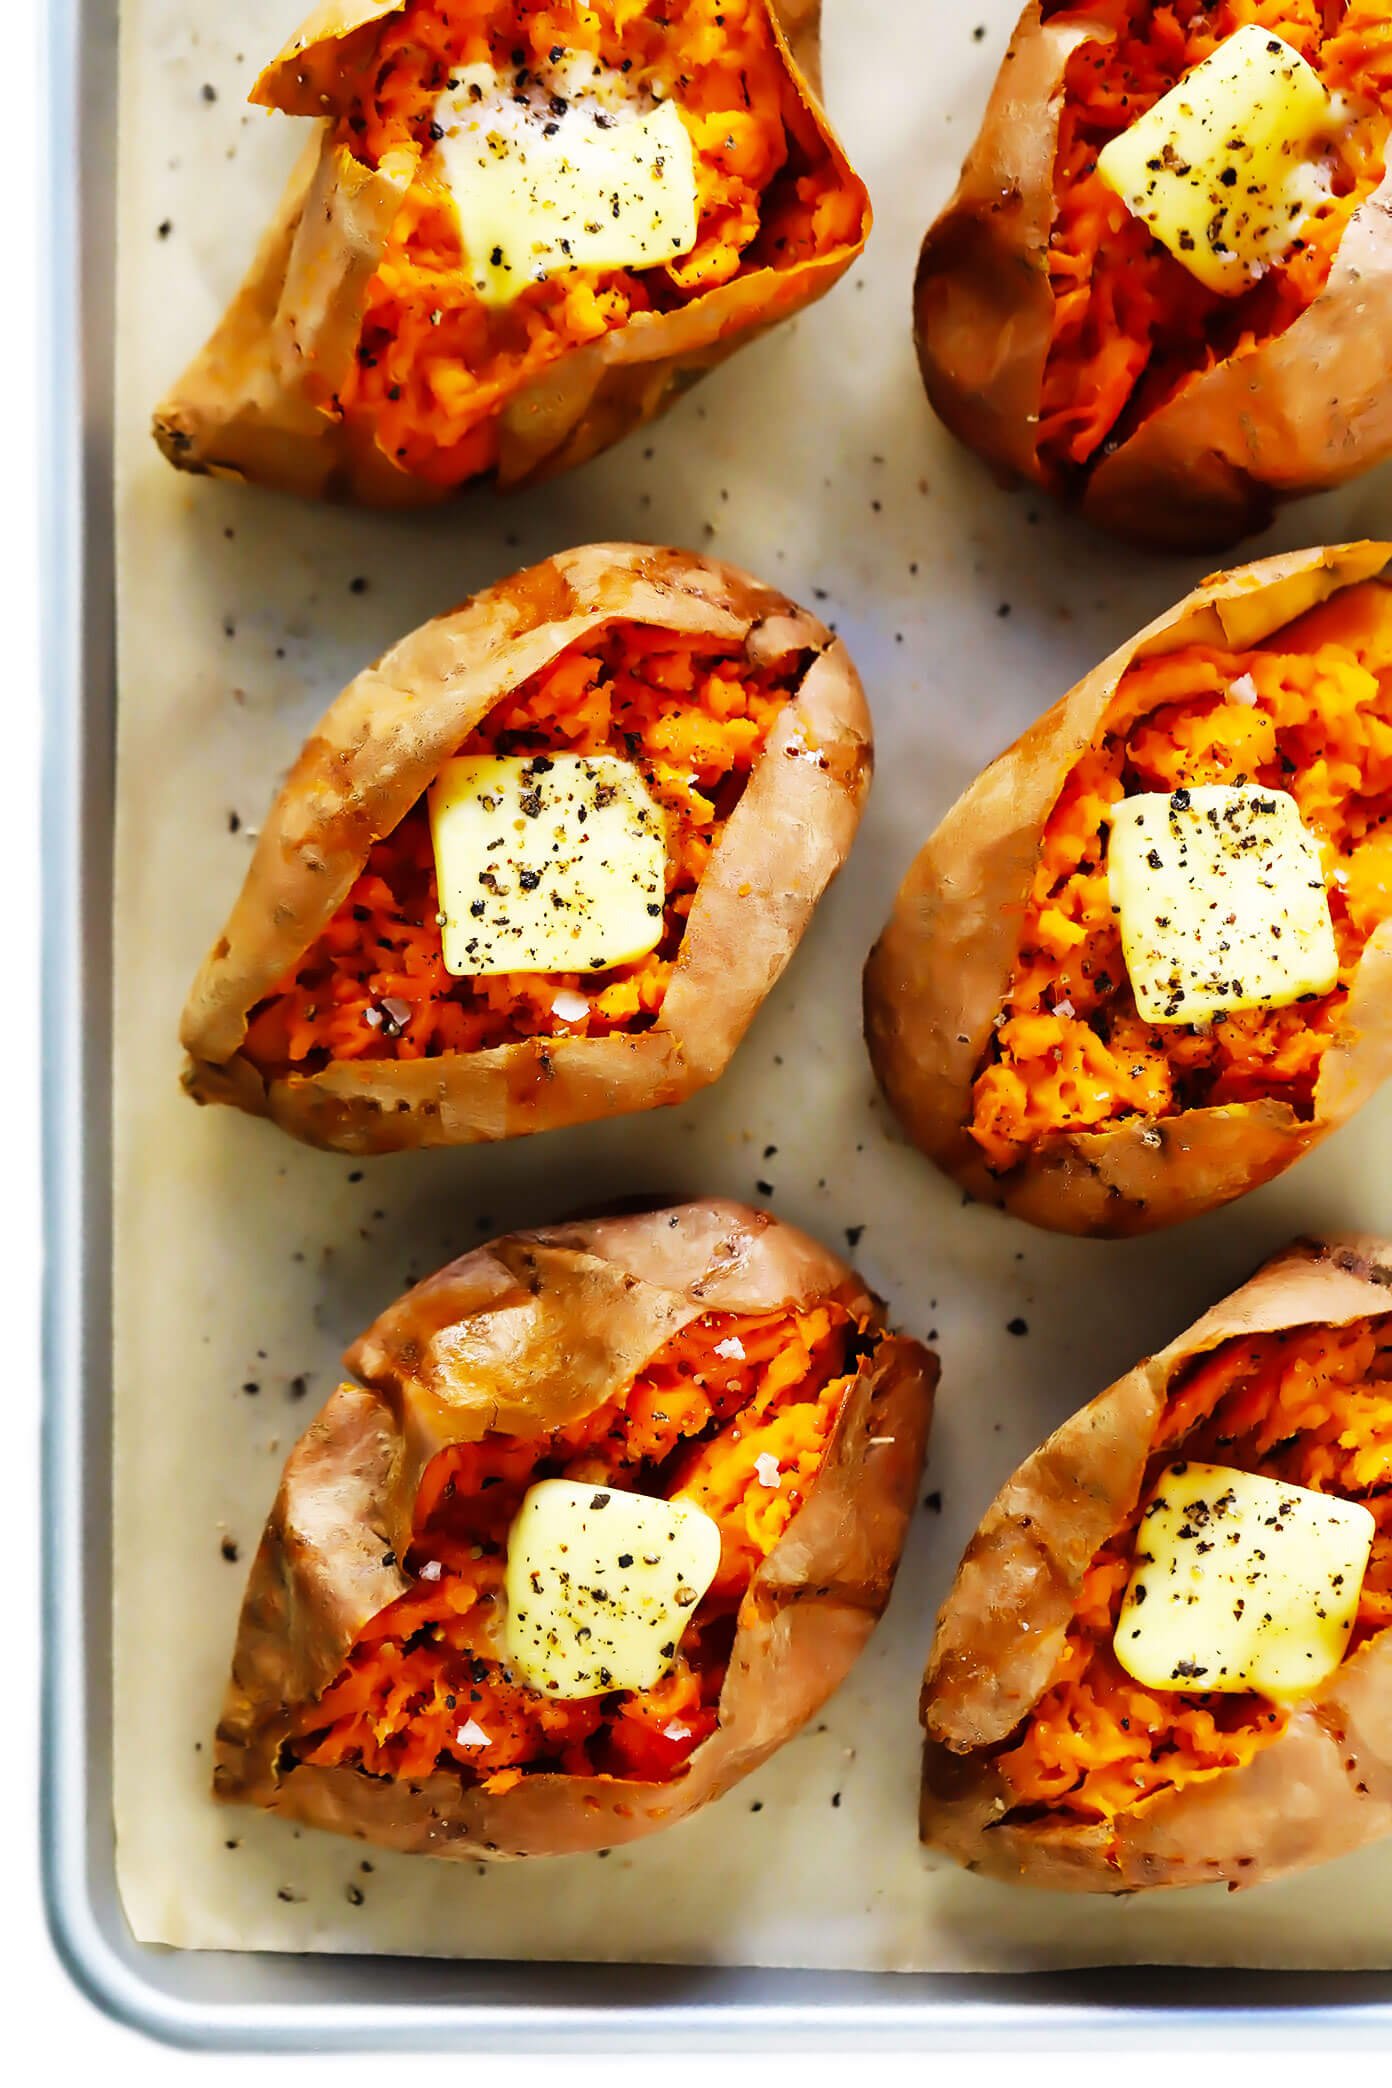 Oven baked sweet potatoes with butter, salt and pepper